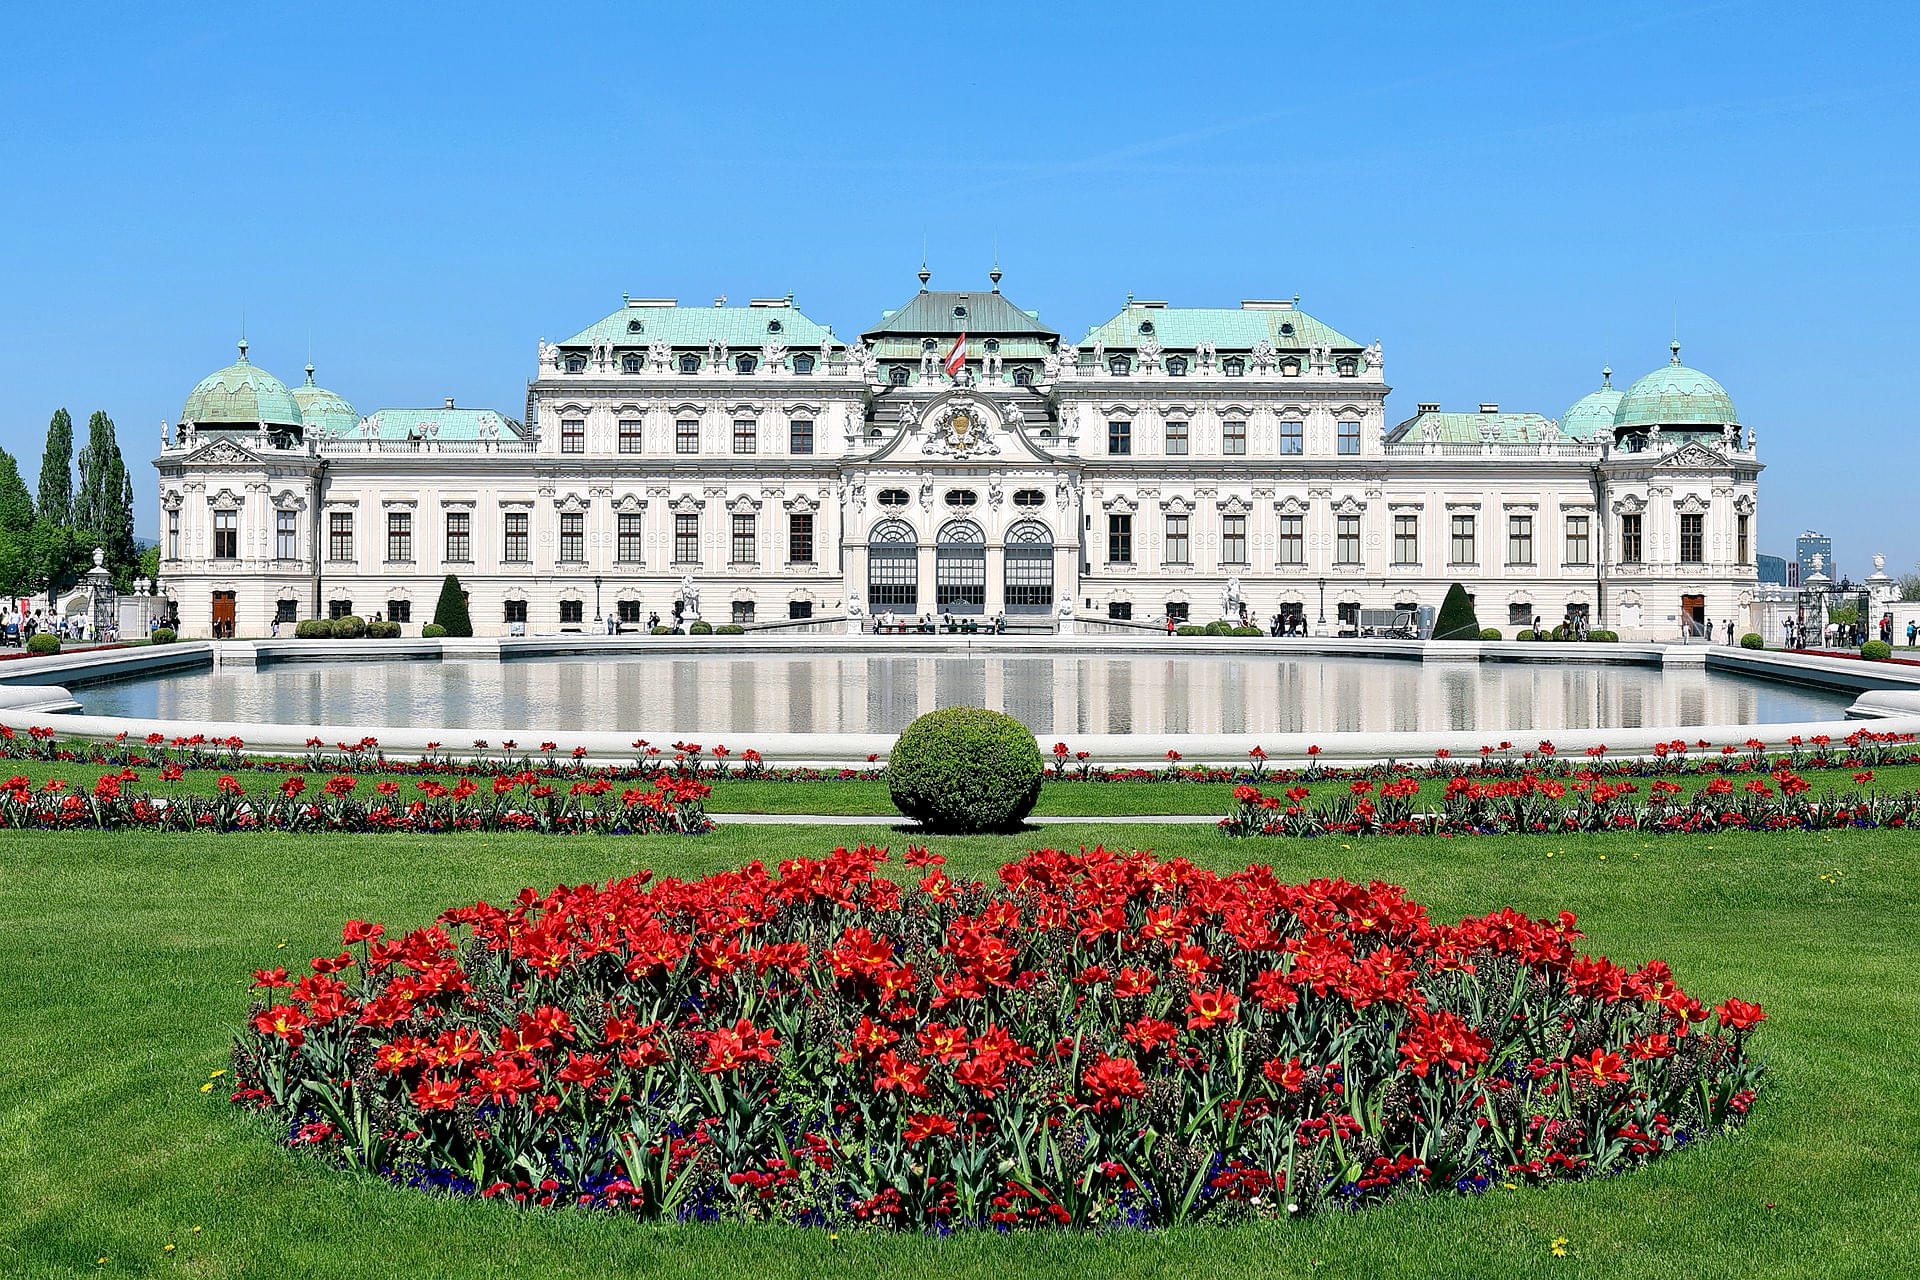 The Belvedere Palace Overview